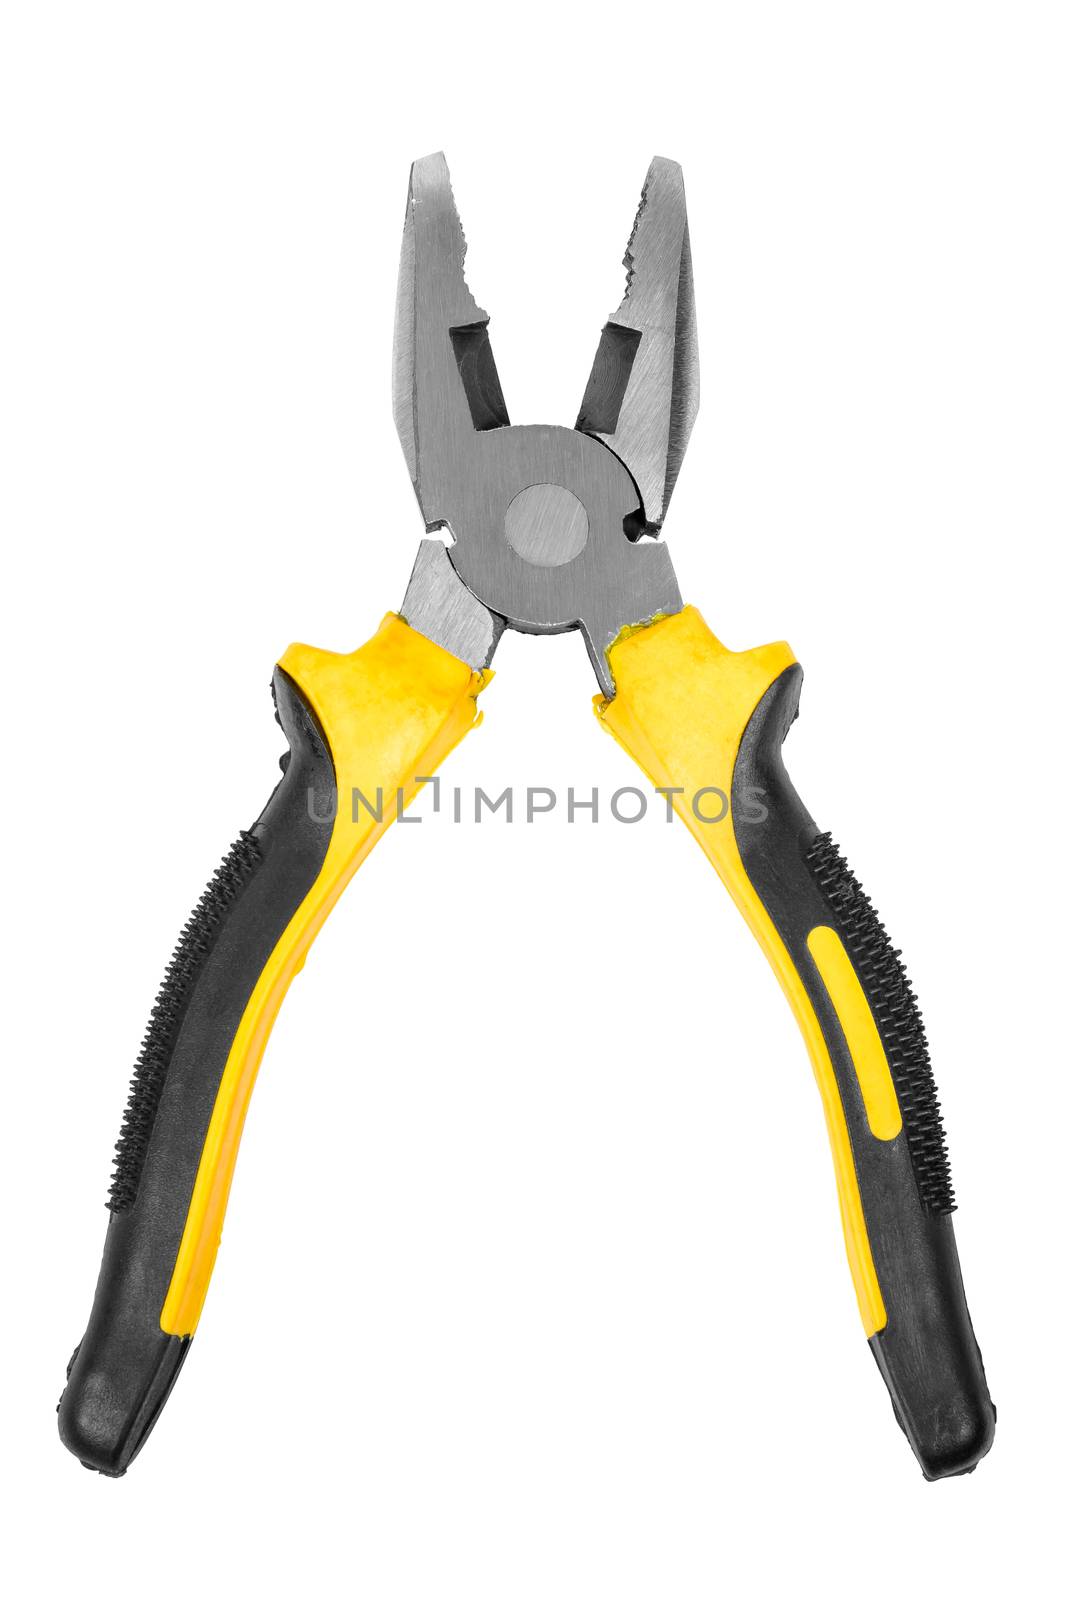 Pliers on white background by mkos83